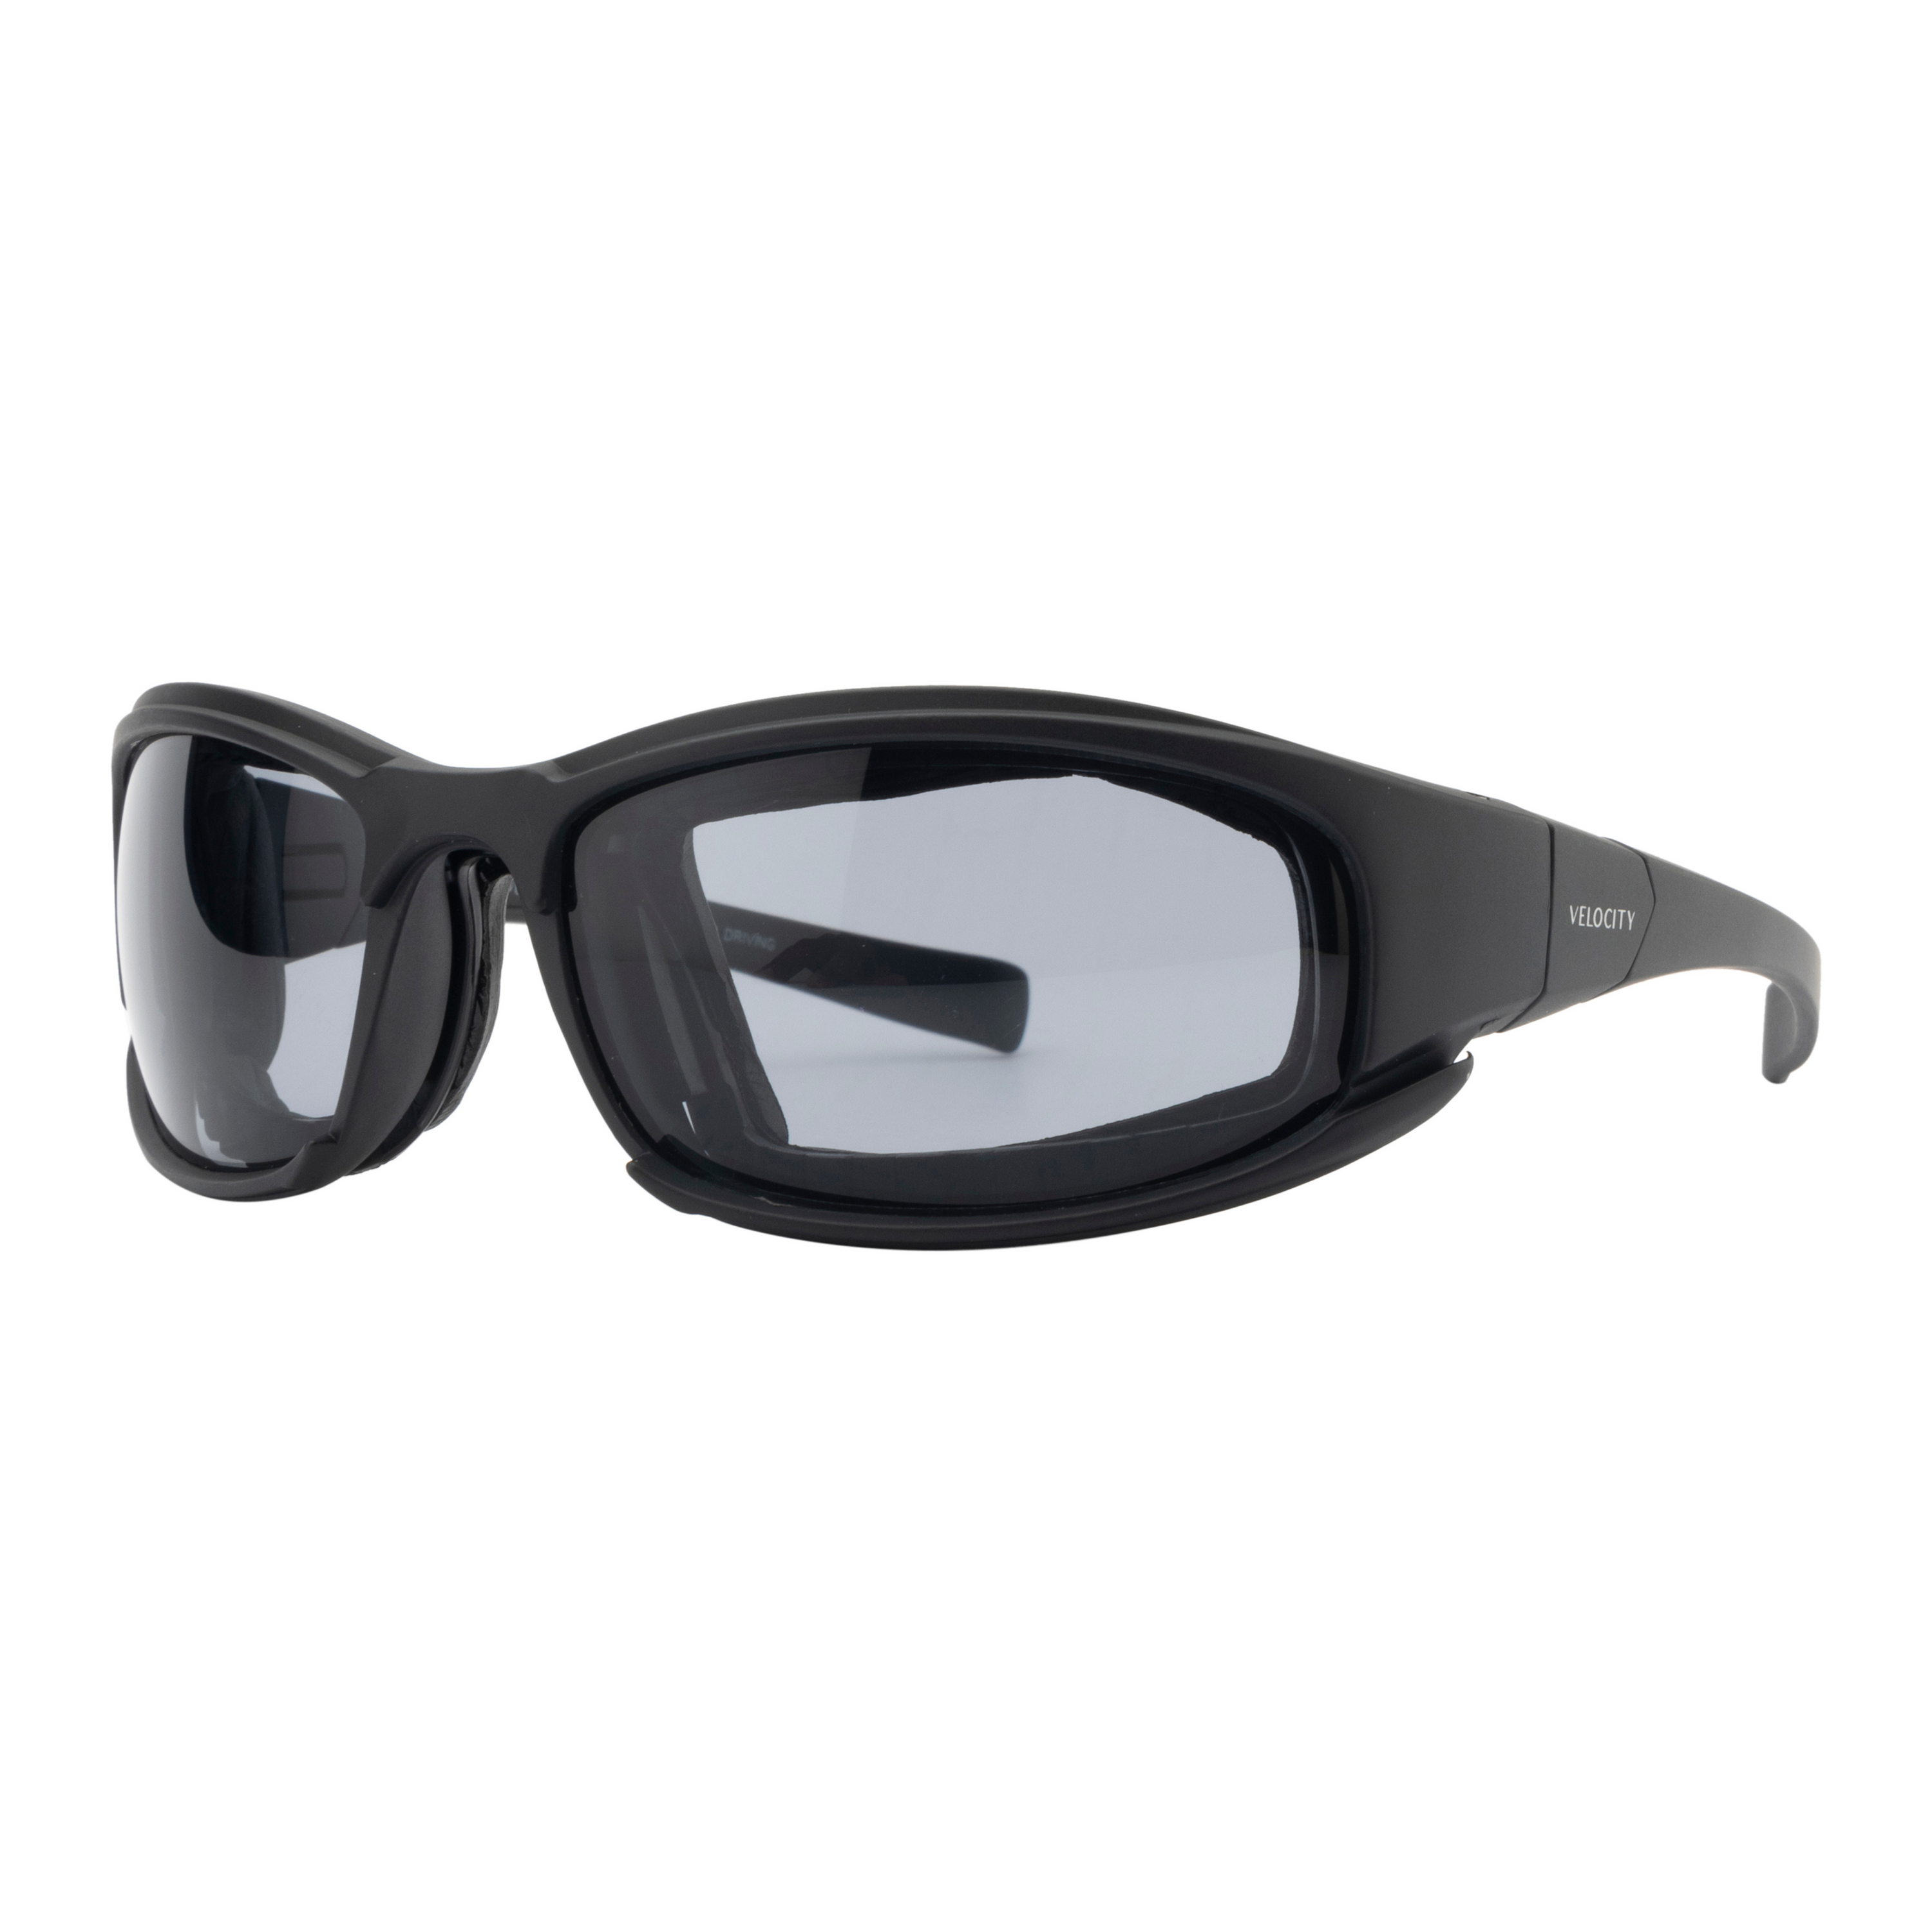 Velocity Riding Sports Sunglass | Driving Clear Vision | Car Driving | Bike Riding Glasses - 781-PG3